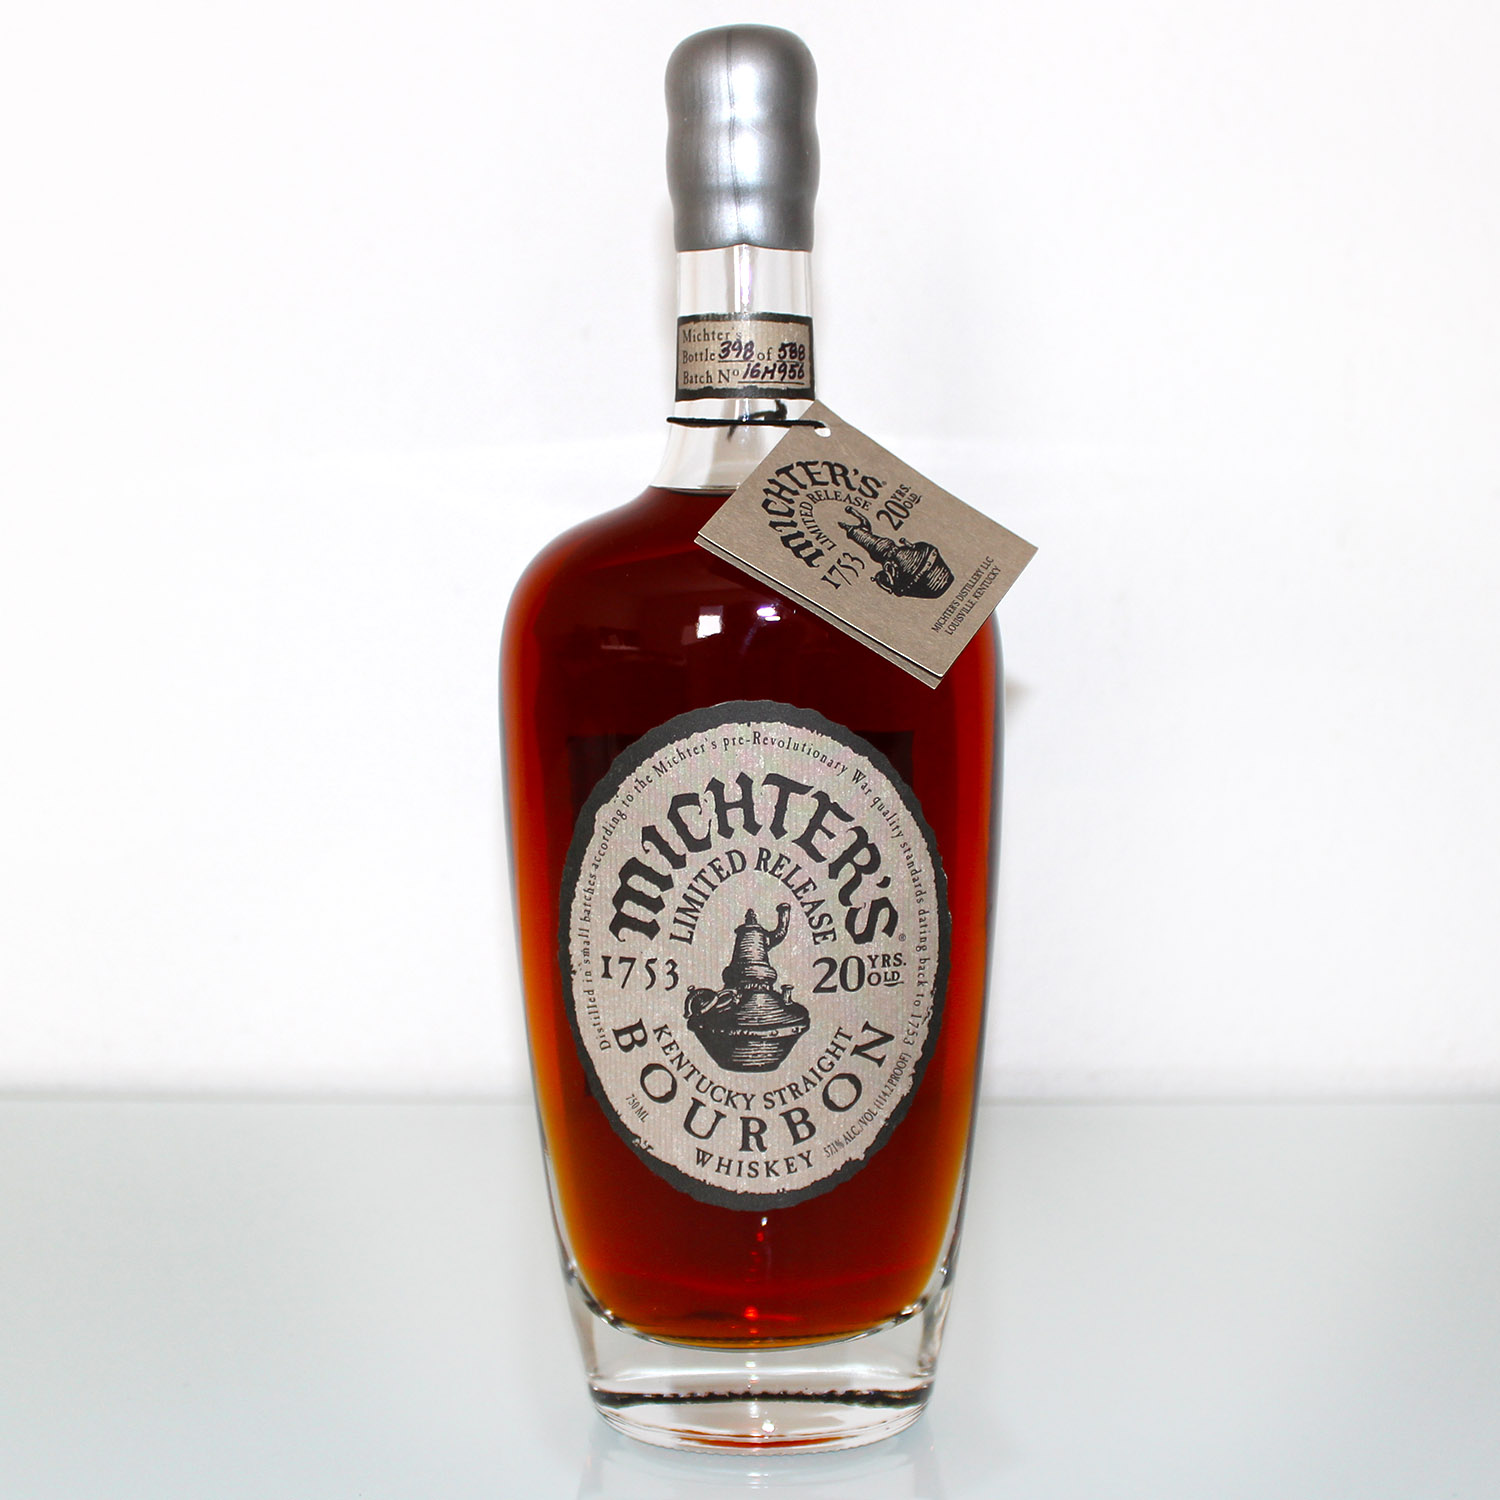 Michters 20 Year old Limited Release Bourbon Whiskey